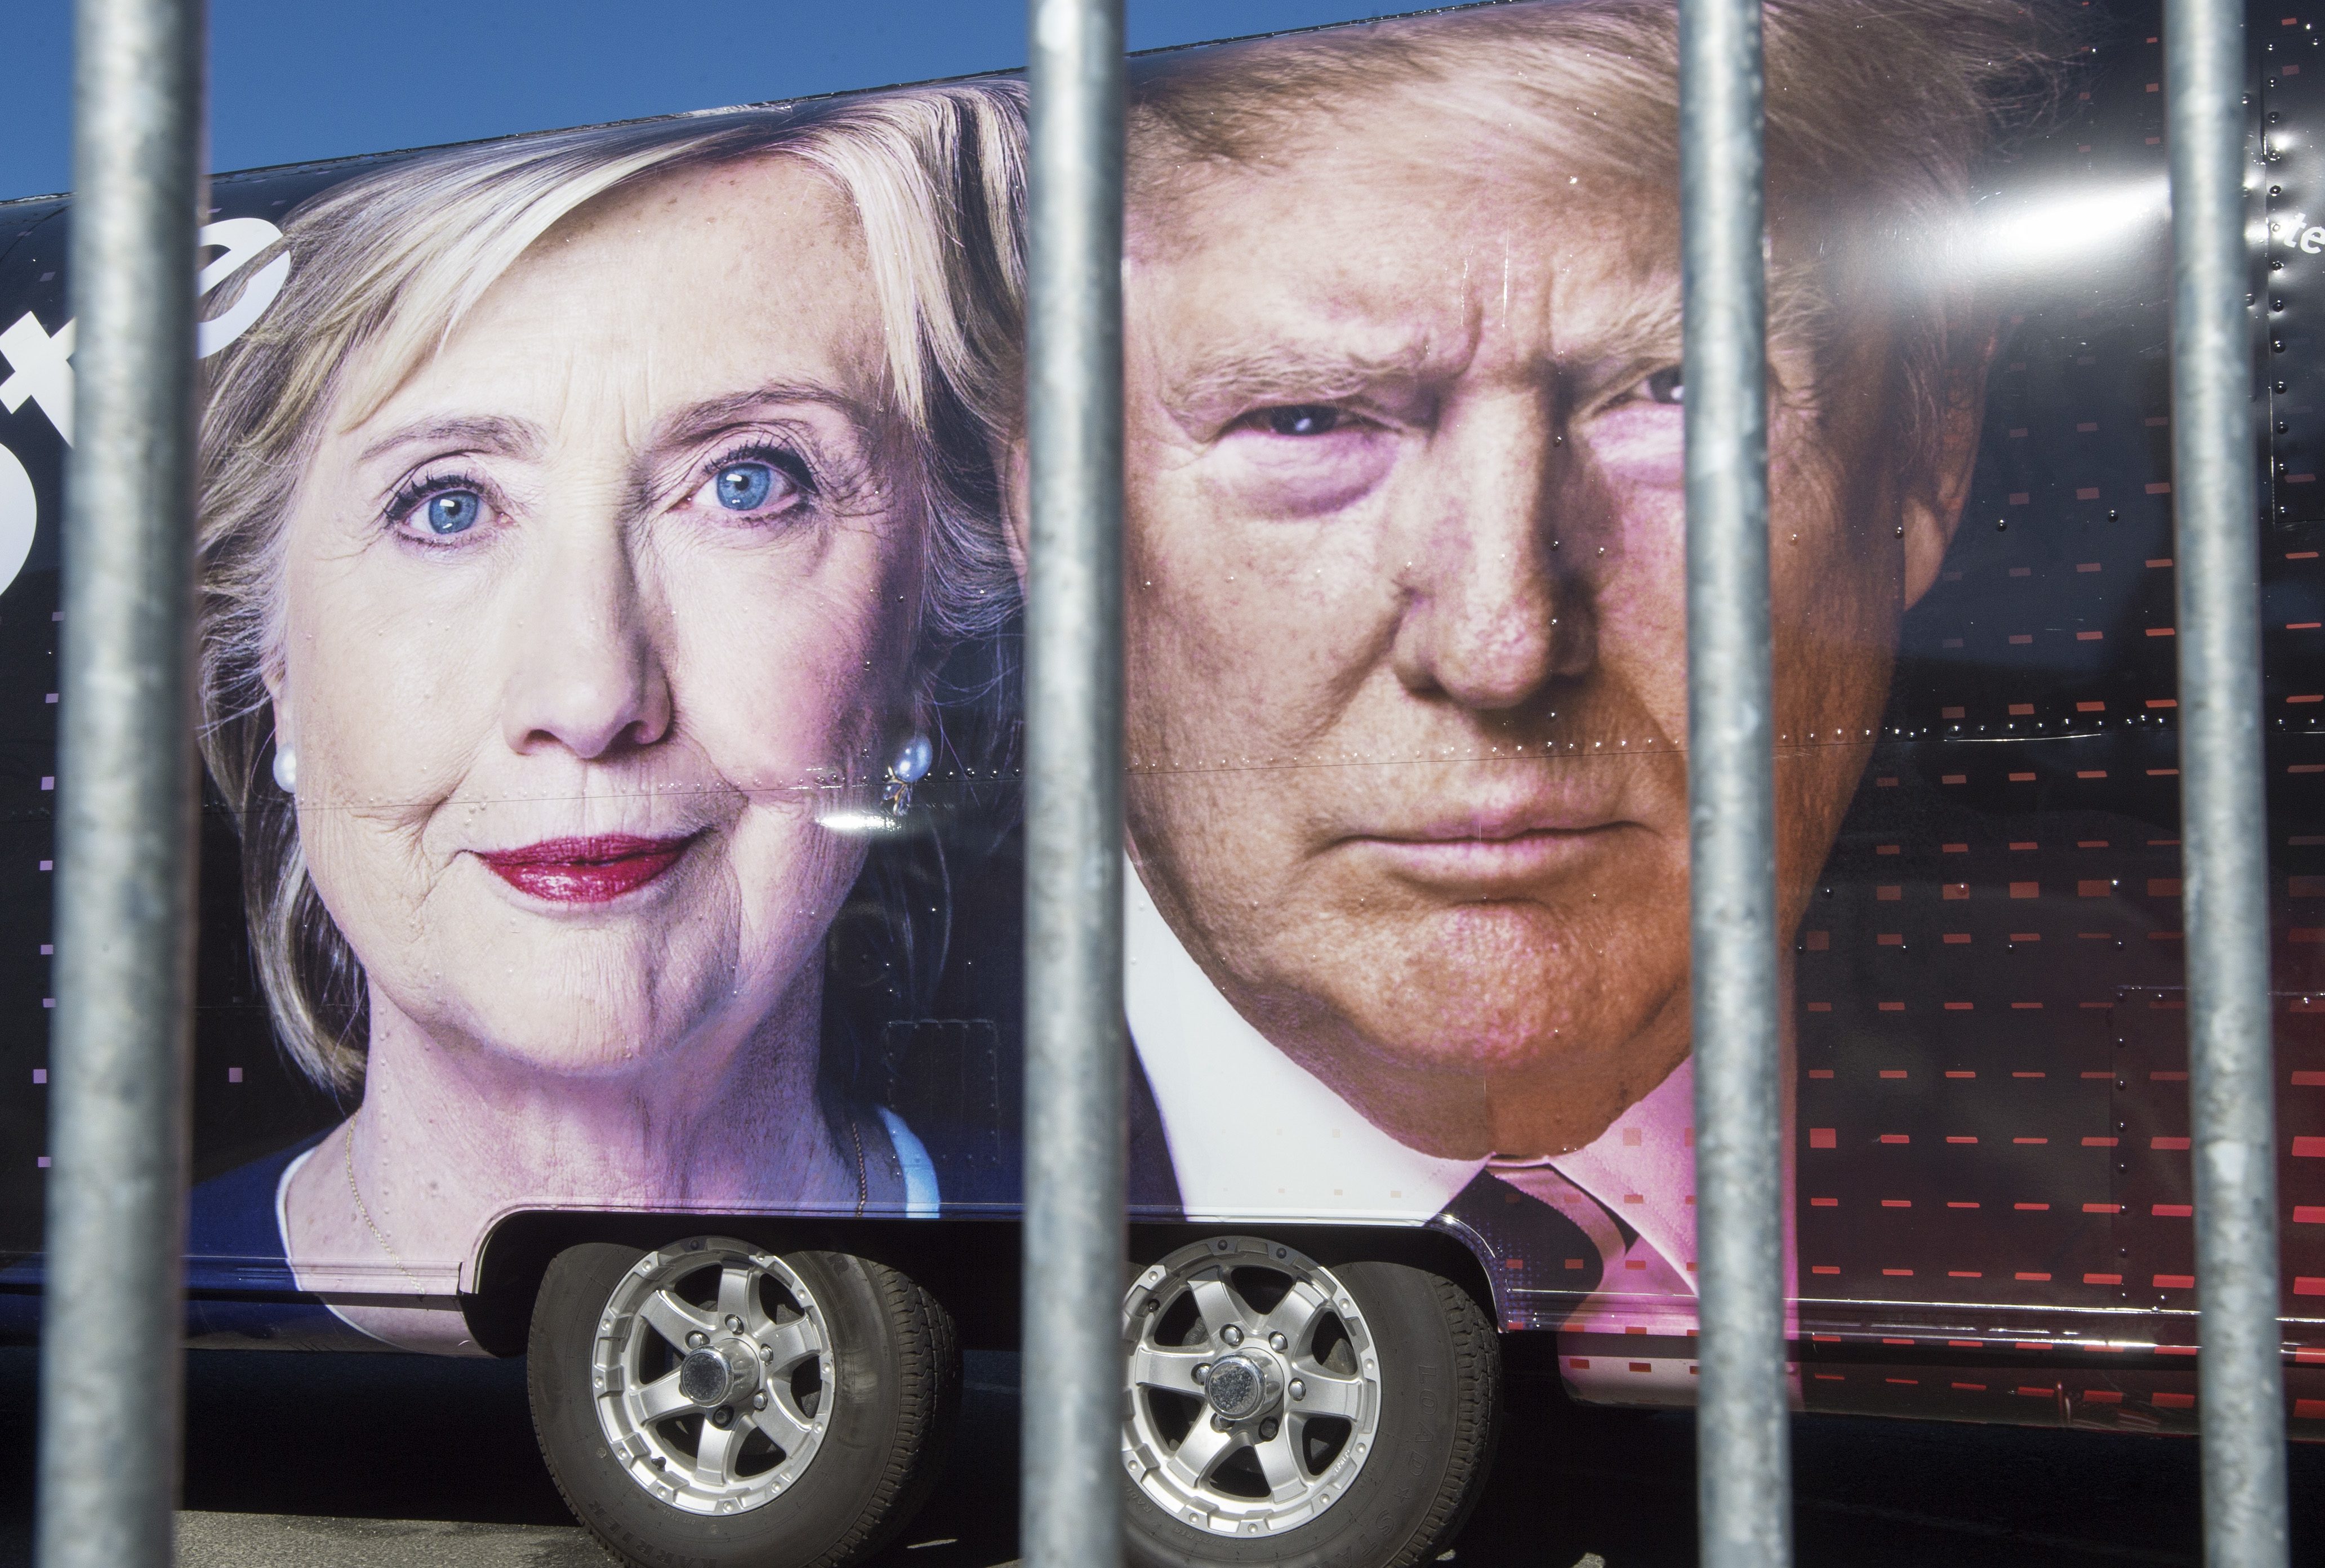 Large images of Democratic nominee Hillary Clinton and Republican nominee Donald Trump are seen on a CNN vehicle, behind asecurity fence, on September 24, 2014, at Hofstra University, in Hempsted, New York. The university is the site of the first Presidential debate on September 26, between Democratic nominee Hillary Clinton and Republican nominee Donald Trump. / AFP PHOTO / PAUL J. RICHARDS